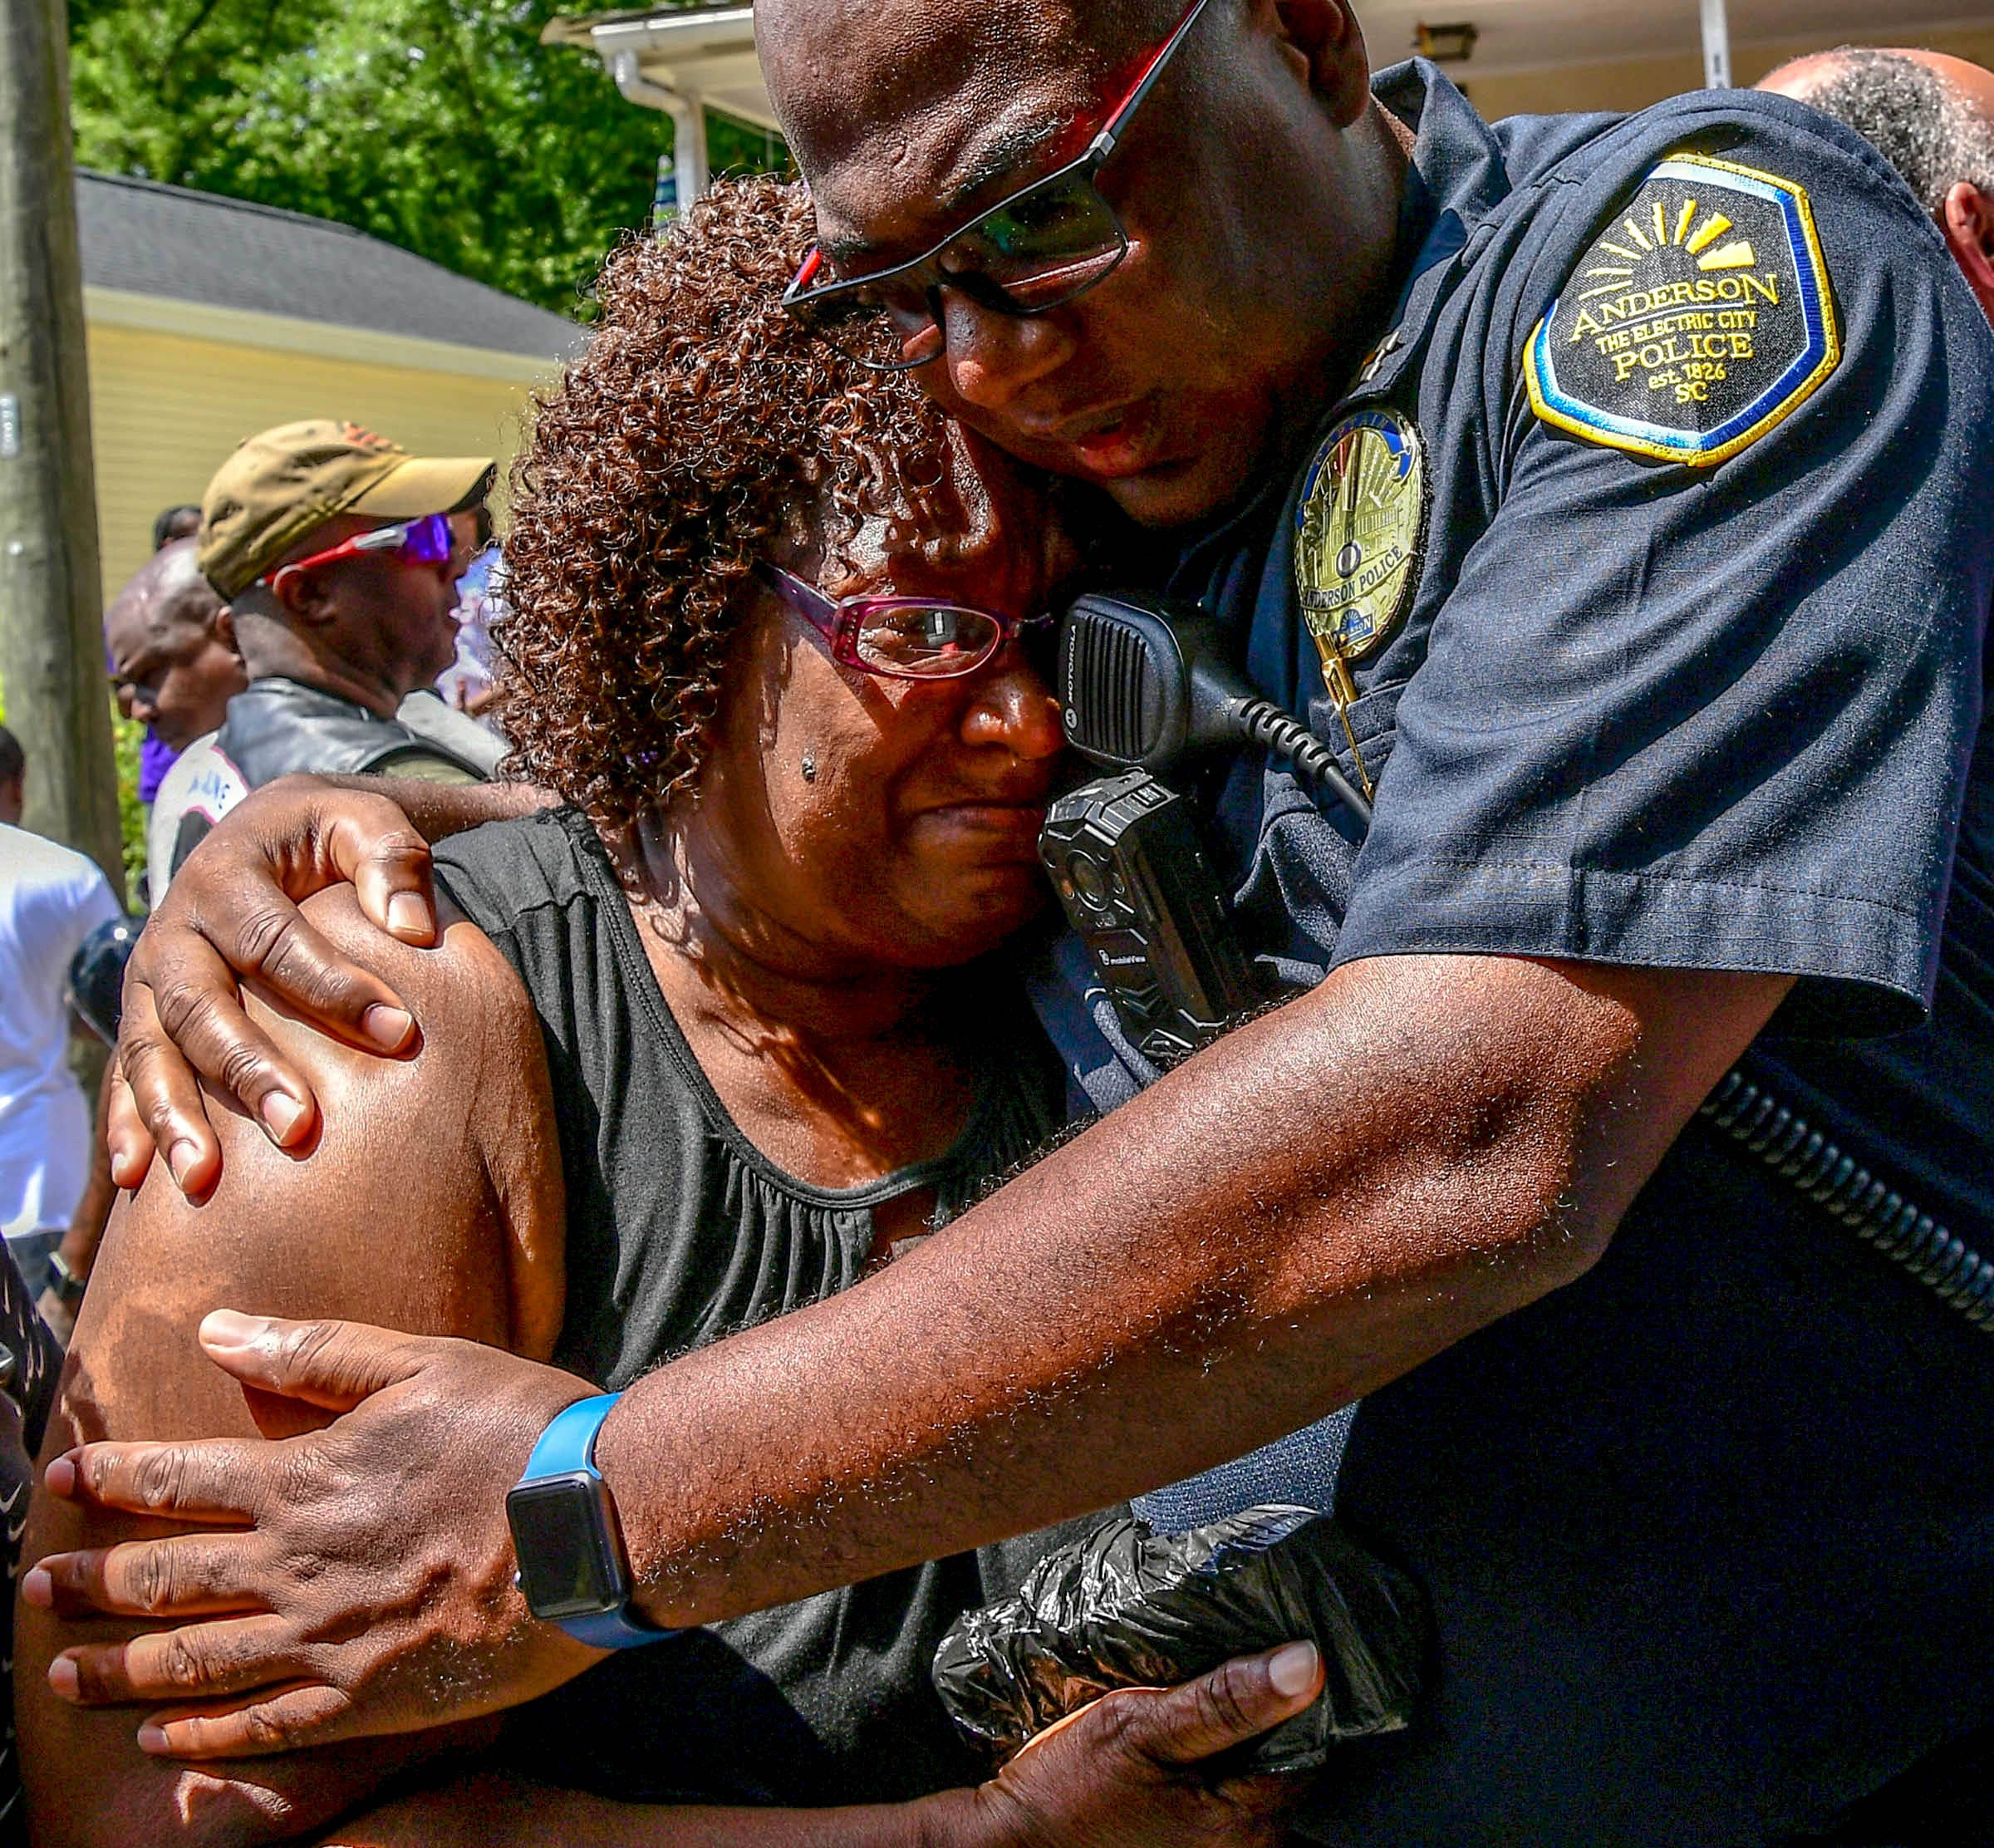 Nora Rice, left, grandmother of Ja'Naiya Scott, gets a hug from Captain Mike Aikens, right, after Upstate Bikers group organizer Tim Irvin presented her with money at the Biker Unity Ride Against Violence for Ja'Naiya Scott, from Greenville to her home in Anderson Saturday. The biker group offered Rice and family of Ja'Naiya Scott their support and the gift. Ja'Naiya Scott, 11, died after 35 gun shots were fired at the house on West End Avenue early Sunday, June 23. Police are looking for more tips in finding the shooter.